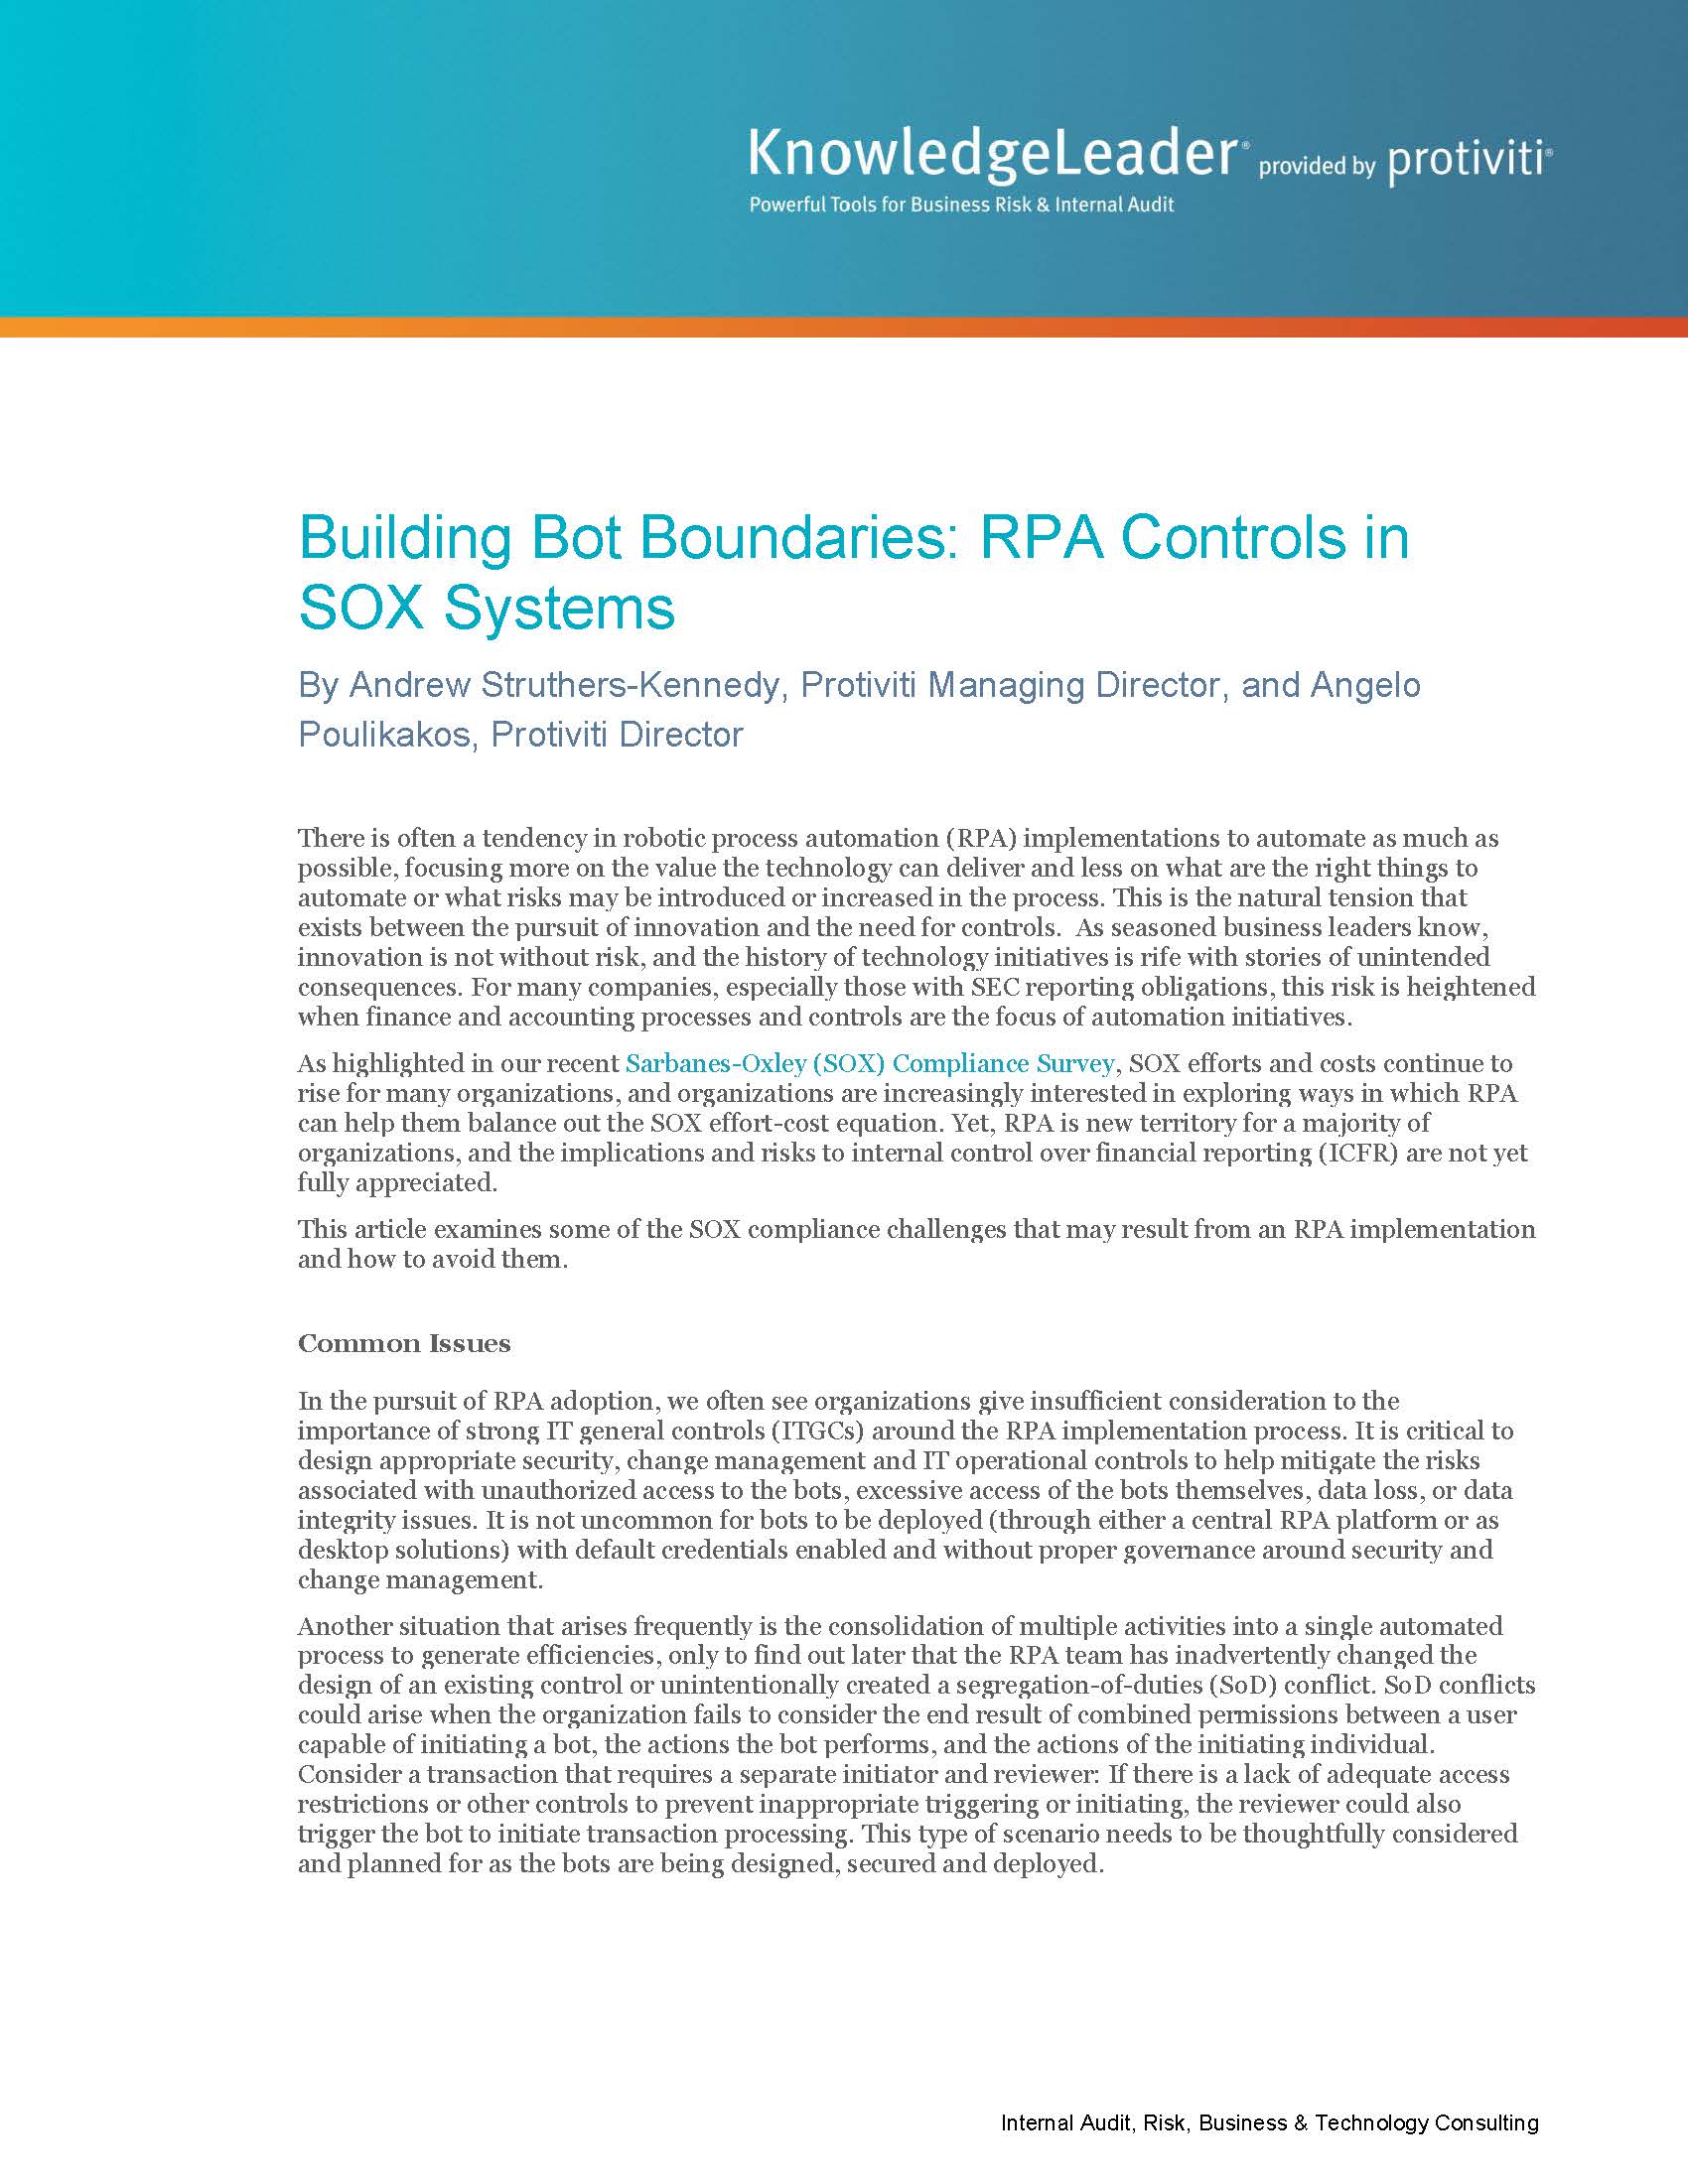 Screenshot of the first page of Building Bot Boundaries RPA Controls in SOX Systems